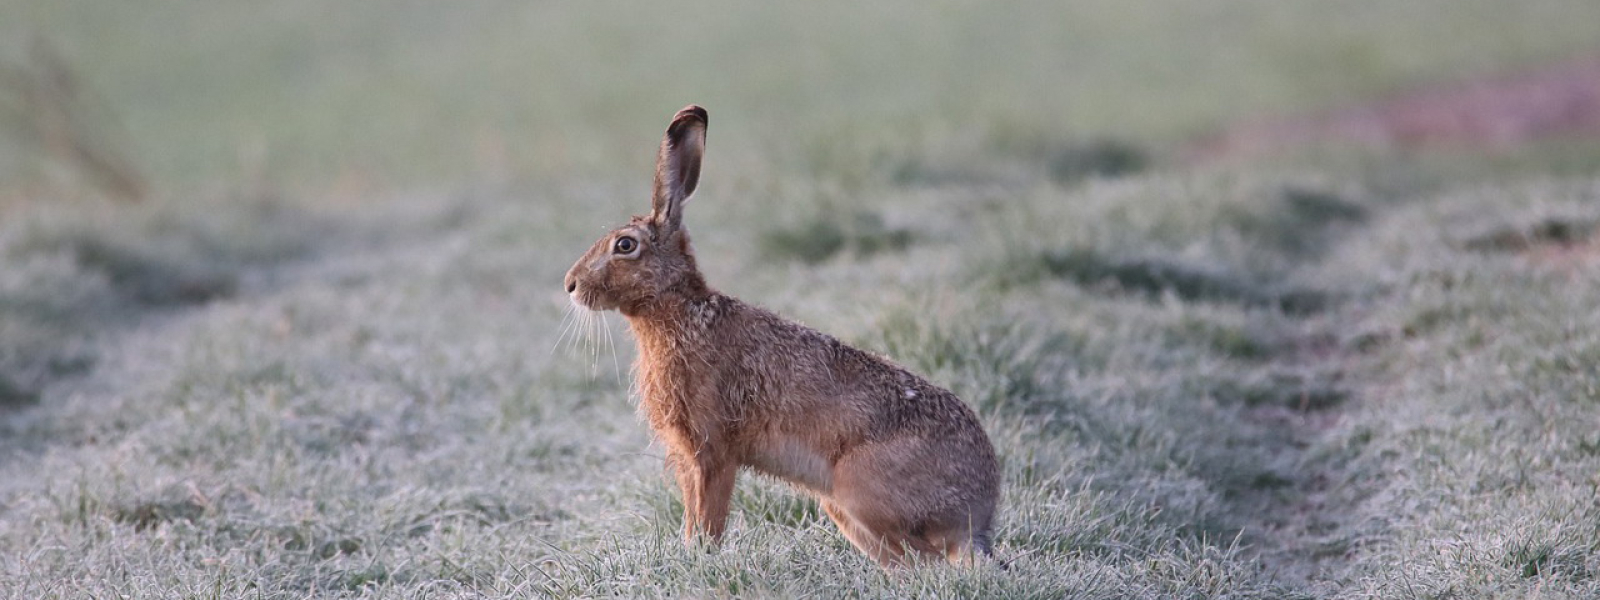 hare poised in a field